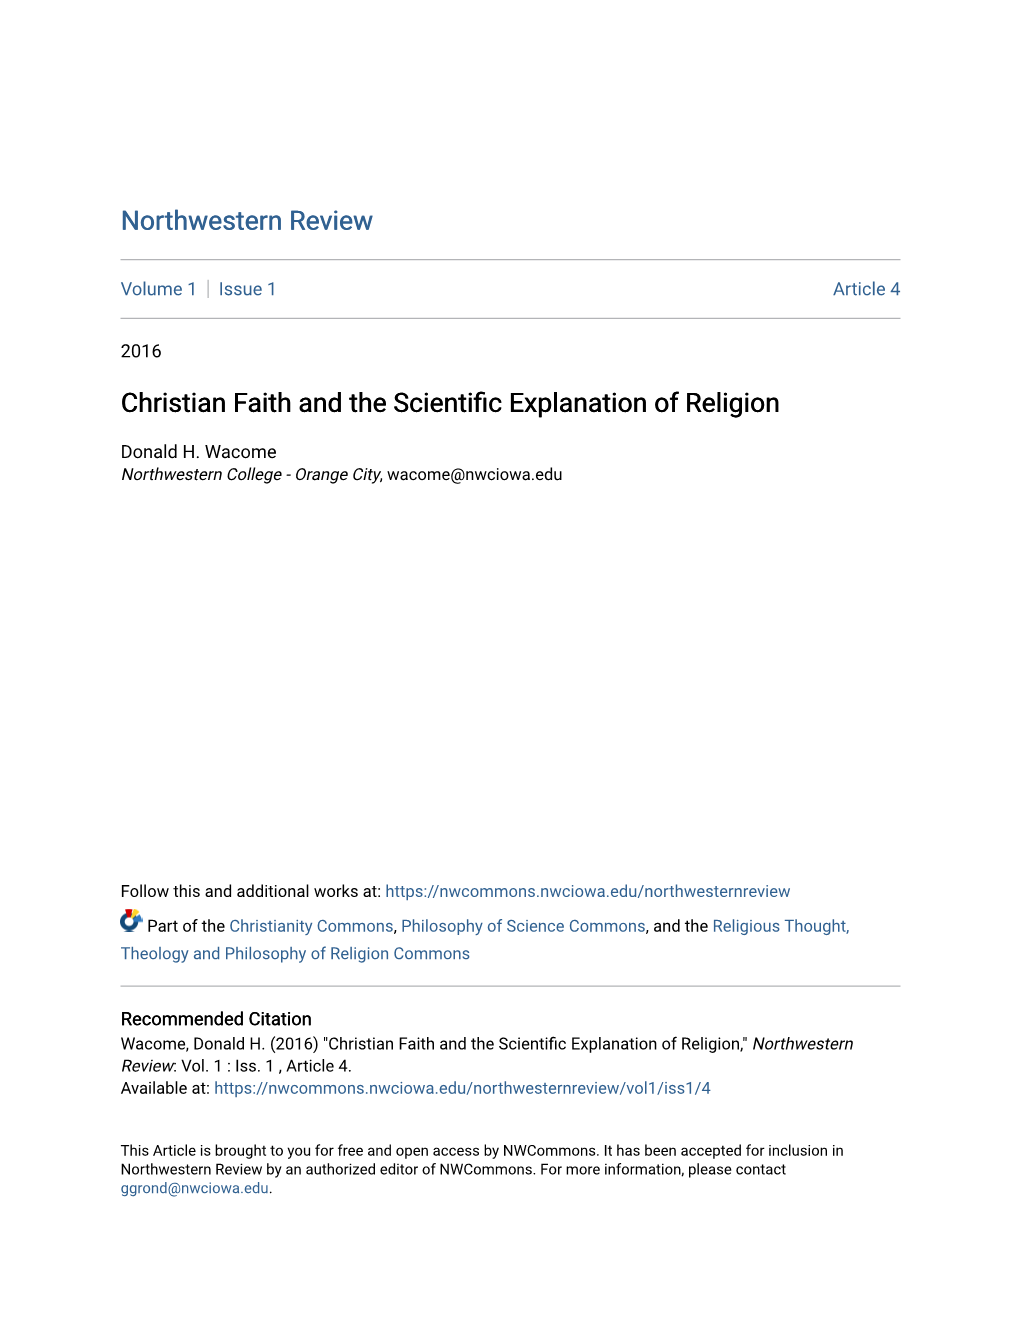 Christian Faith and the Scientific Explanation of Religion